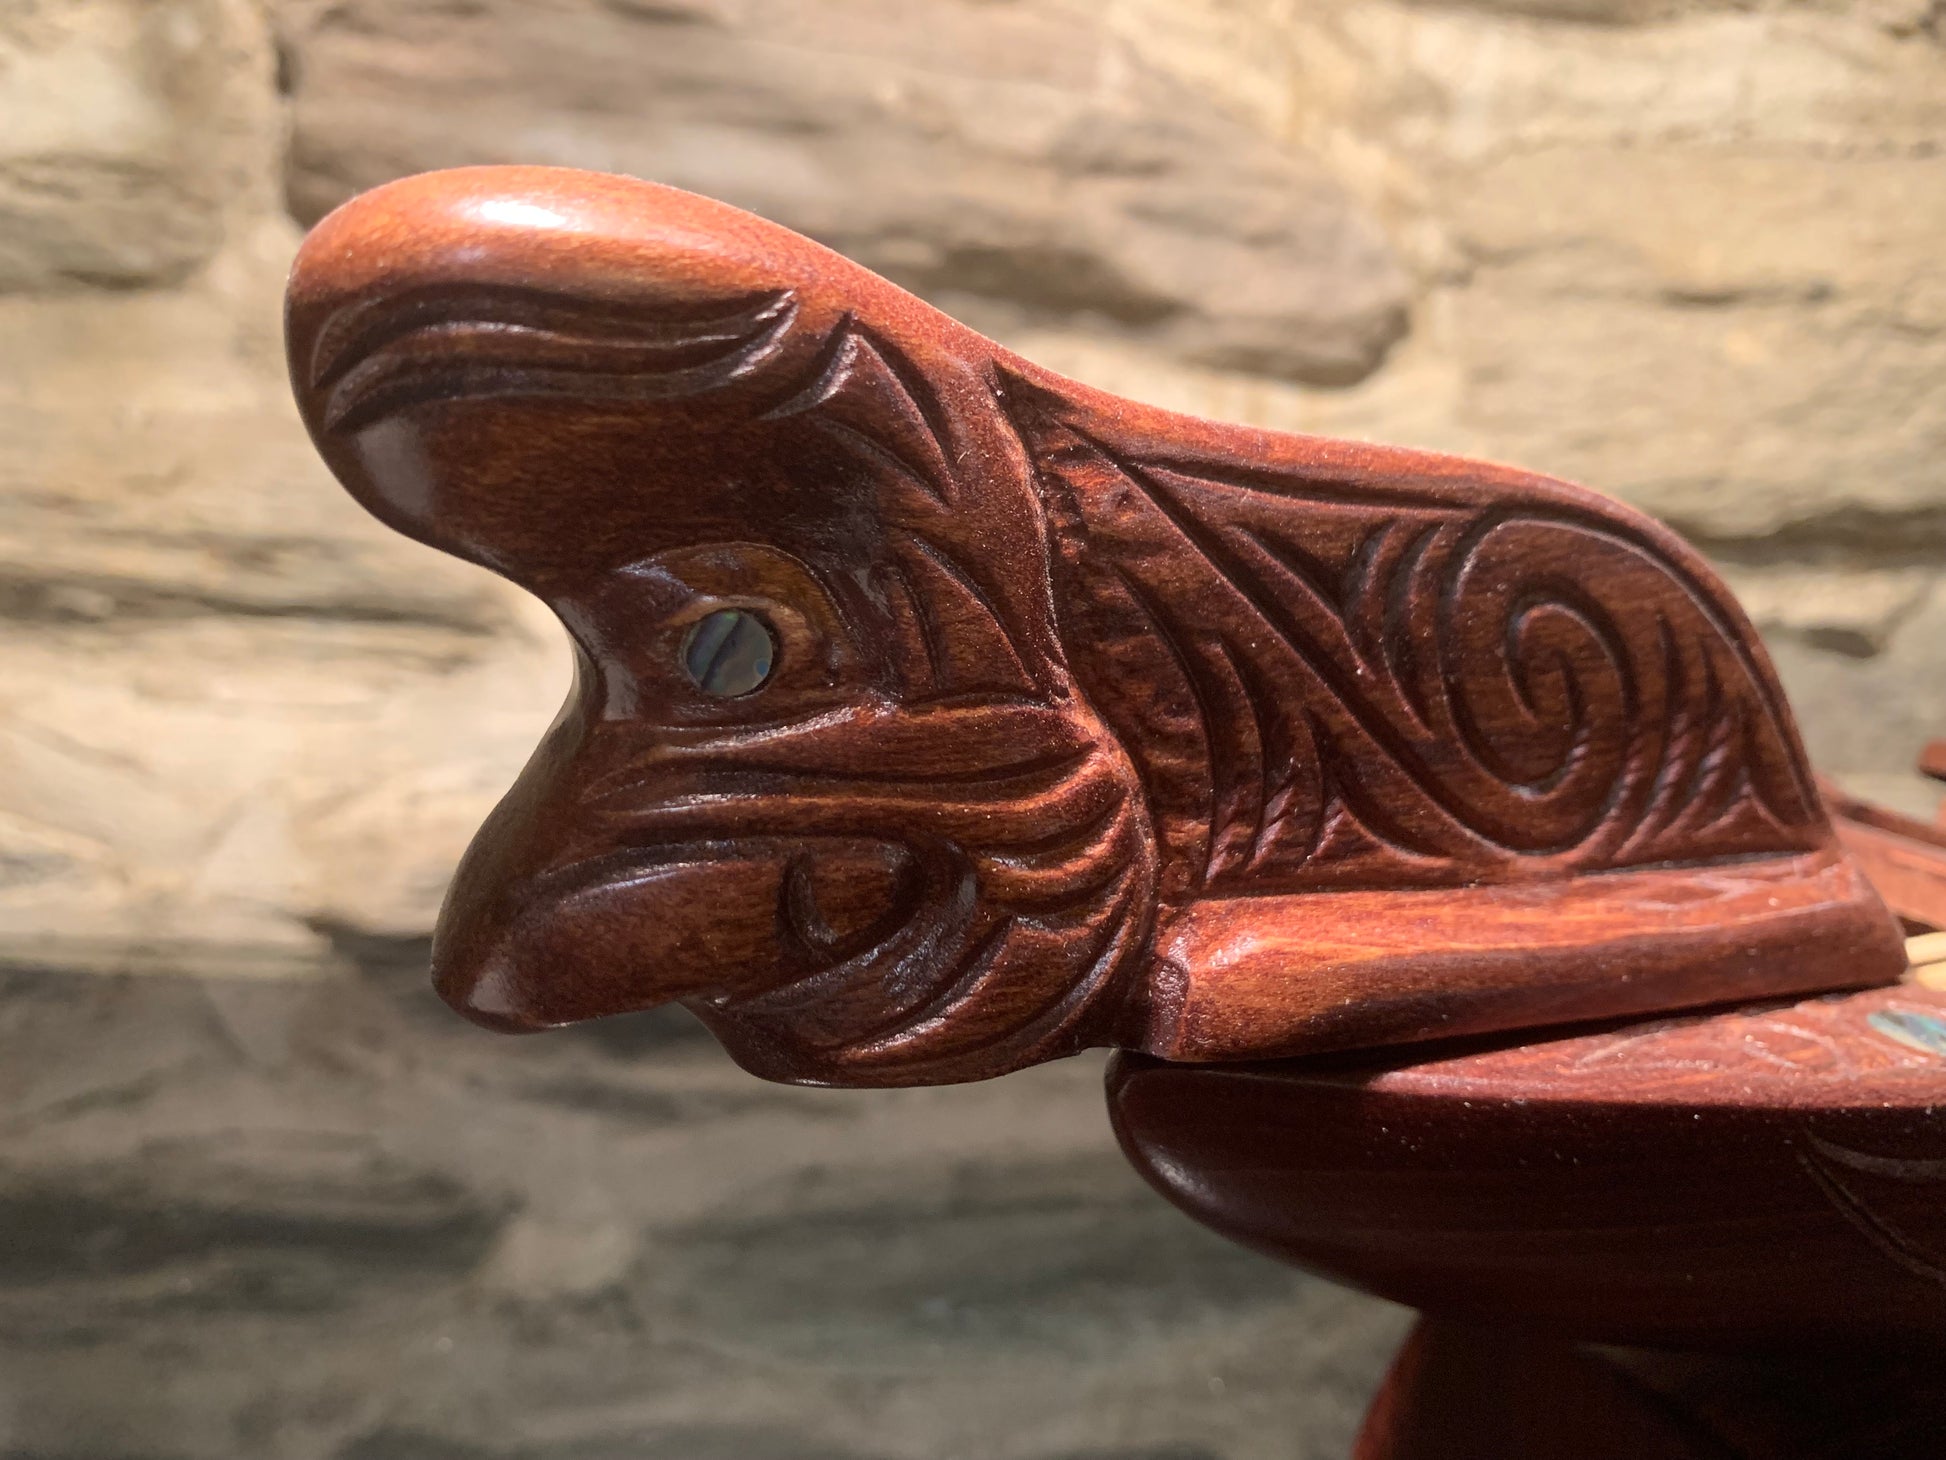 bow view of Maori small waka canoe carved in New Zealand and available from Silver Fern Gallery